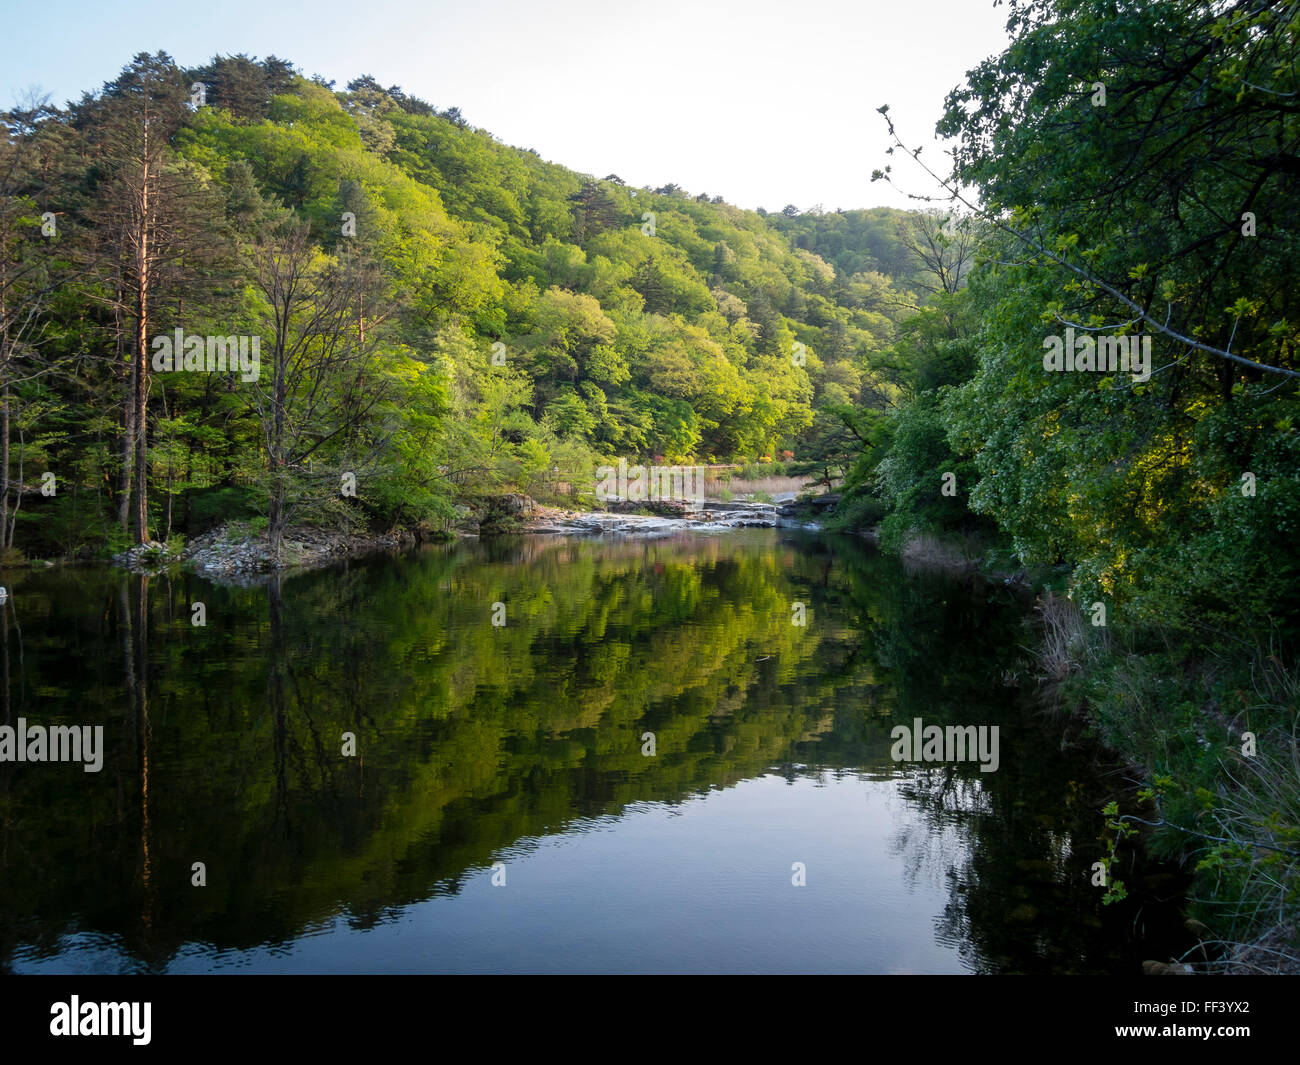 Reflection of a hill of spring green trees in a river. Stock Photo